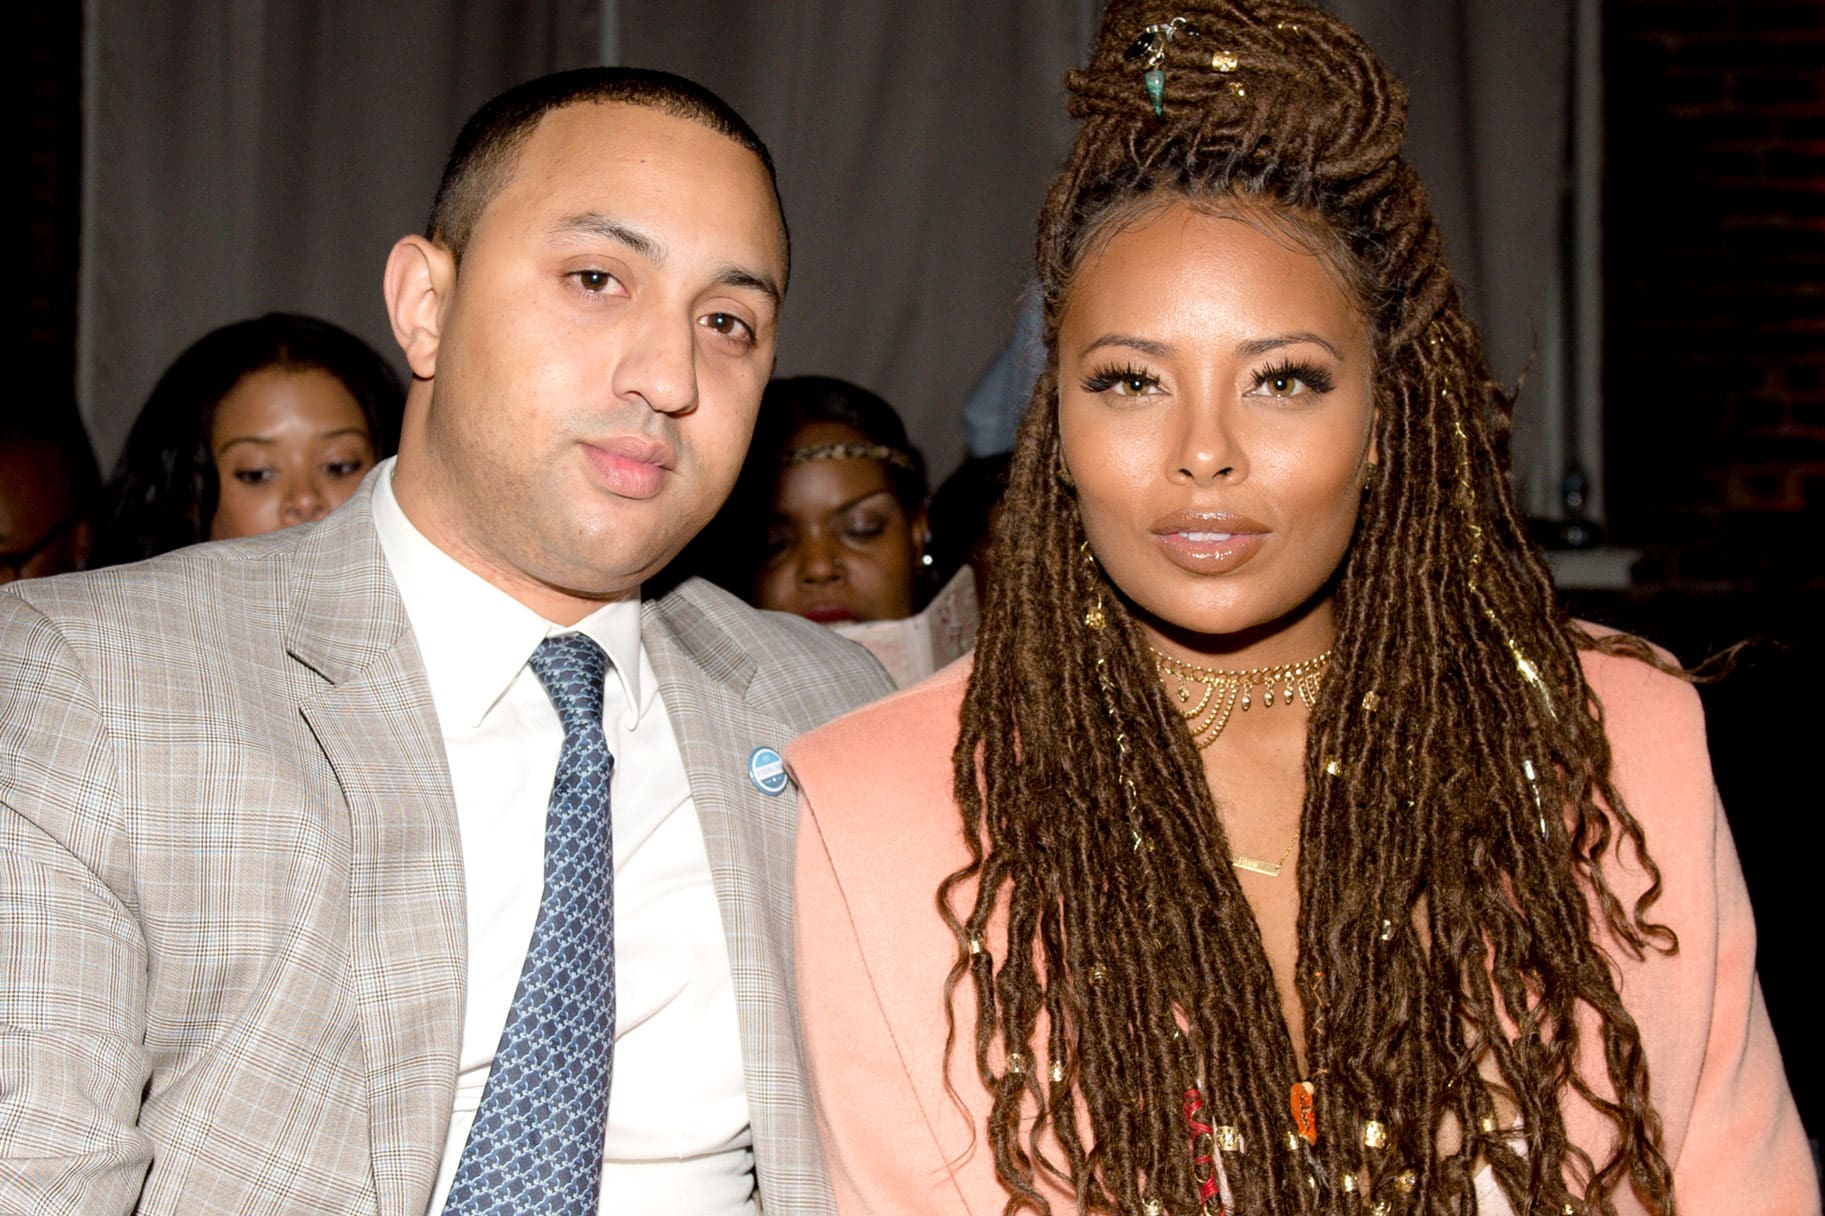 Eva Marcille's Video Featuring Mike Sterling Impresses Fans - Here's What He Has To Say